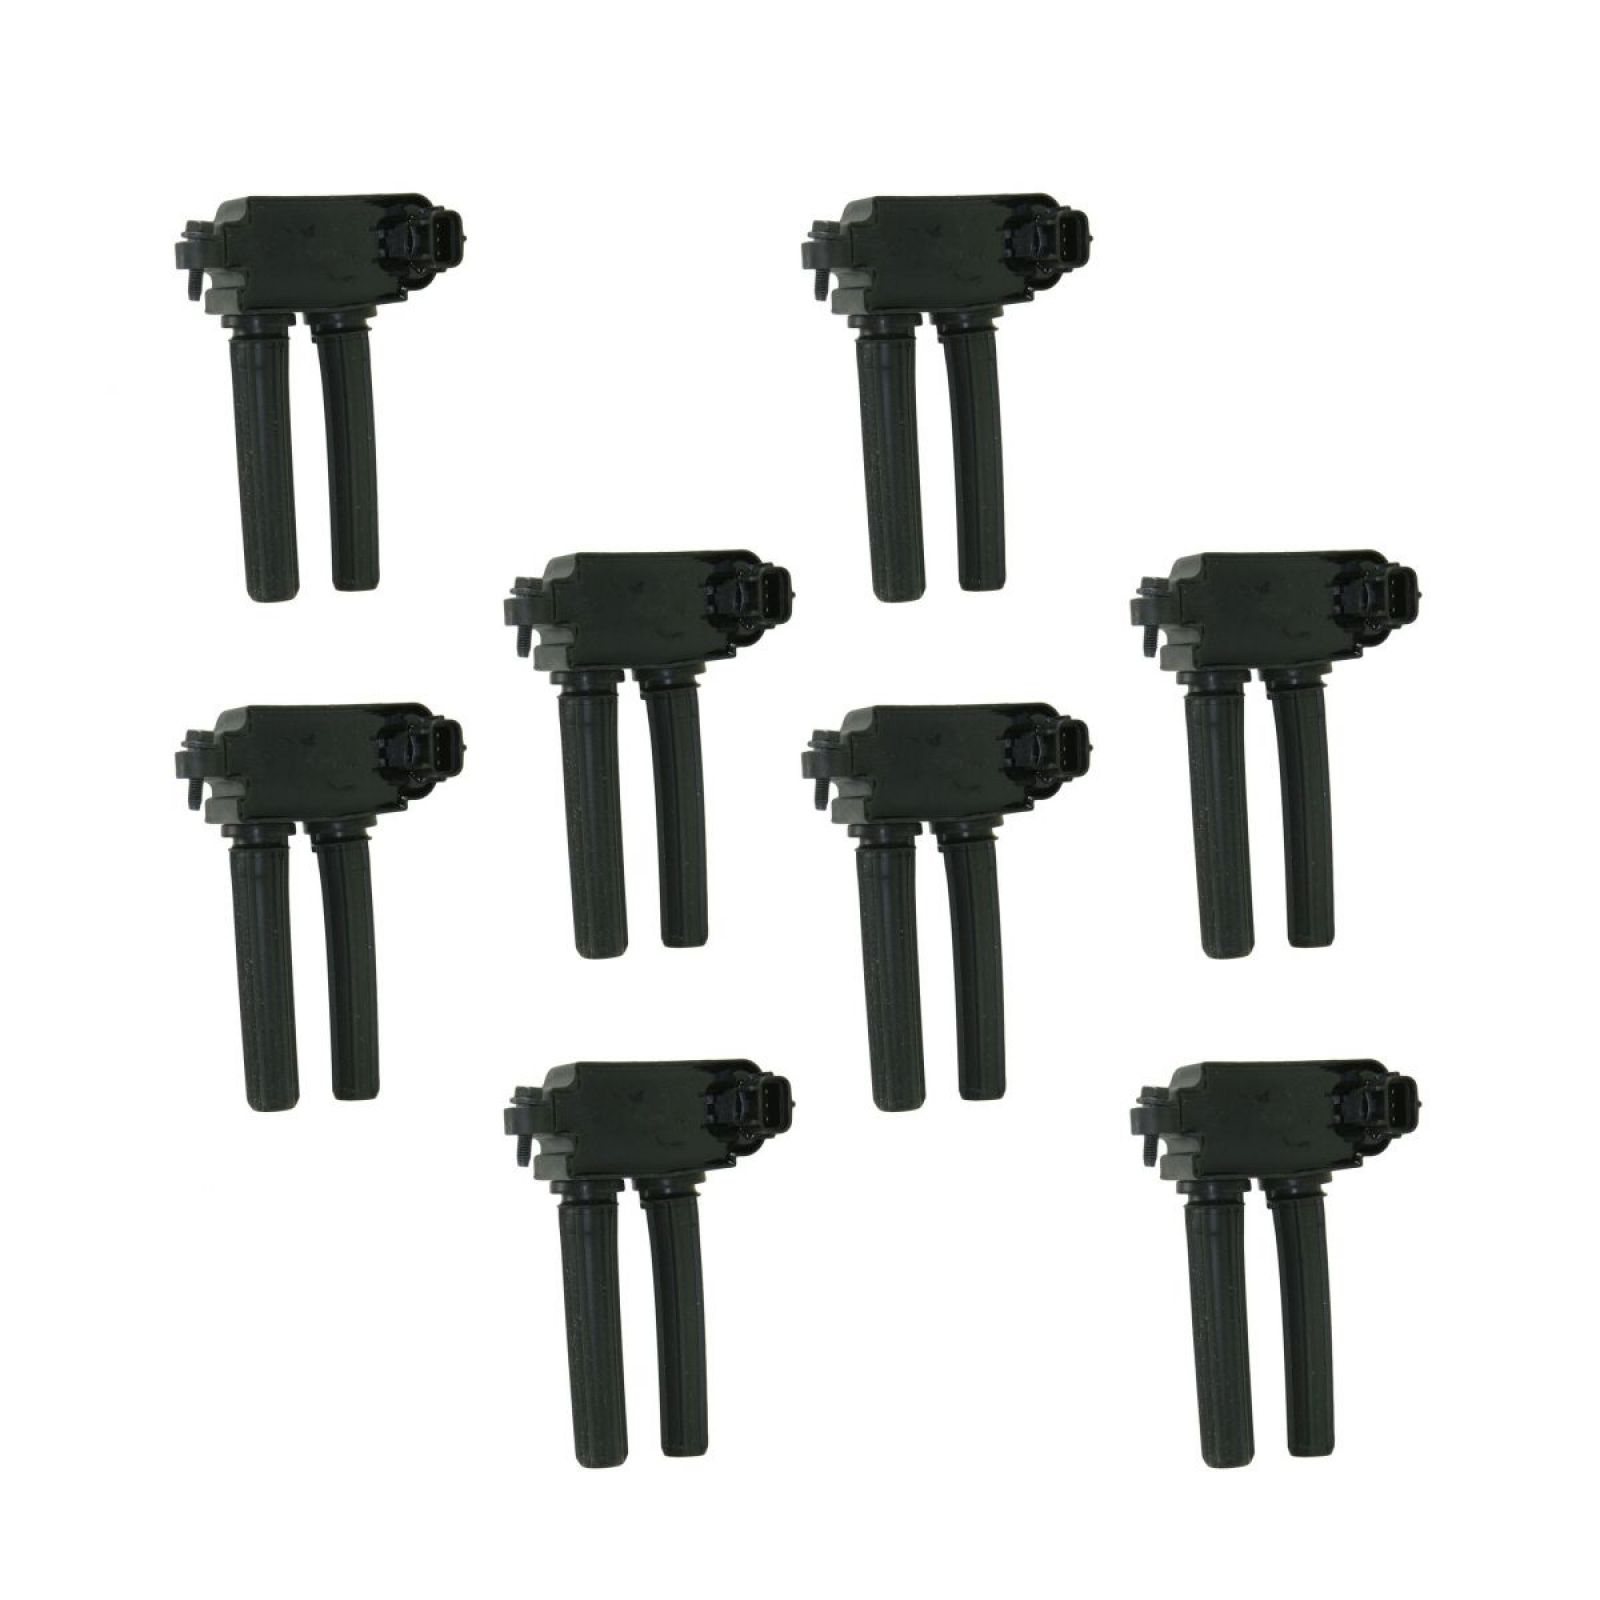 Trq 8 Piece Ignition Coil Set For 06-20 Grand Cherokee 06-10 Commander, HWNV-ICA61494